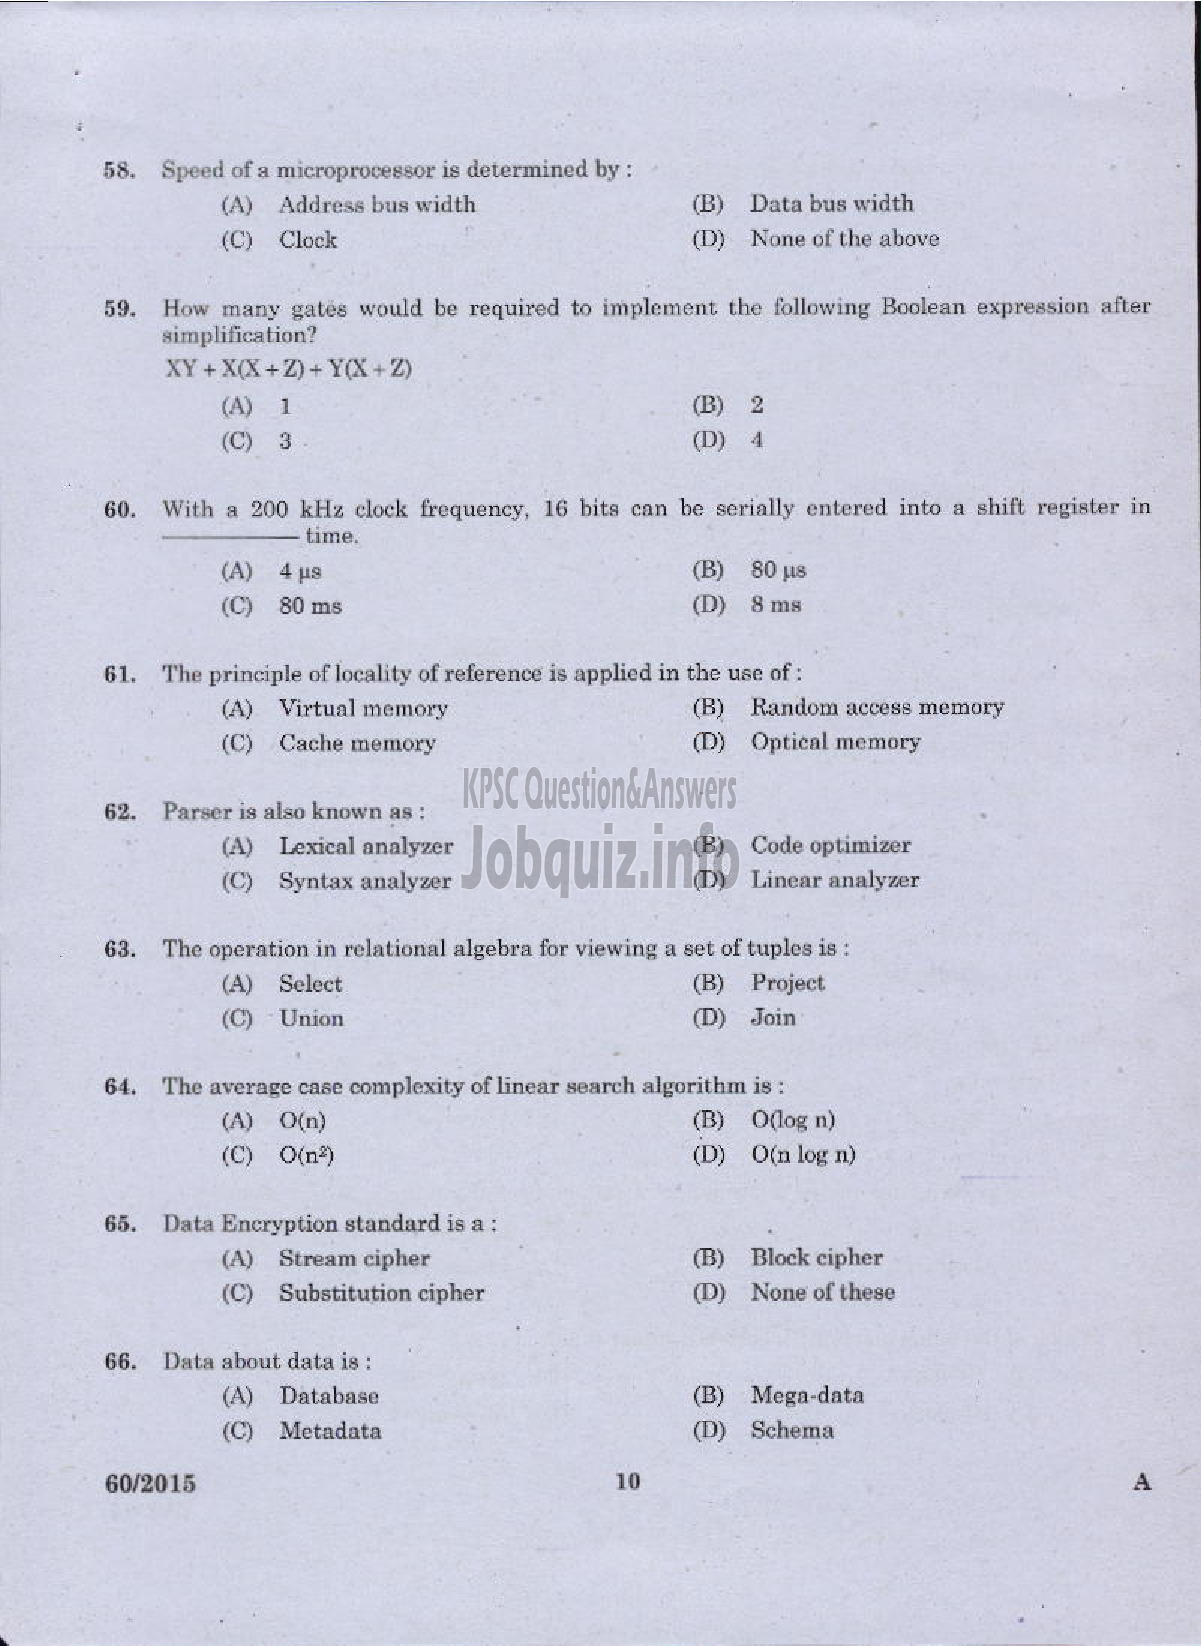 Kerala PSC Question Paper - COMPUTER PROGRAMMER TECHNICAL EDUCATION ENGINEERING COLLEGES-8